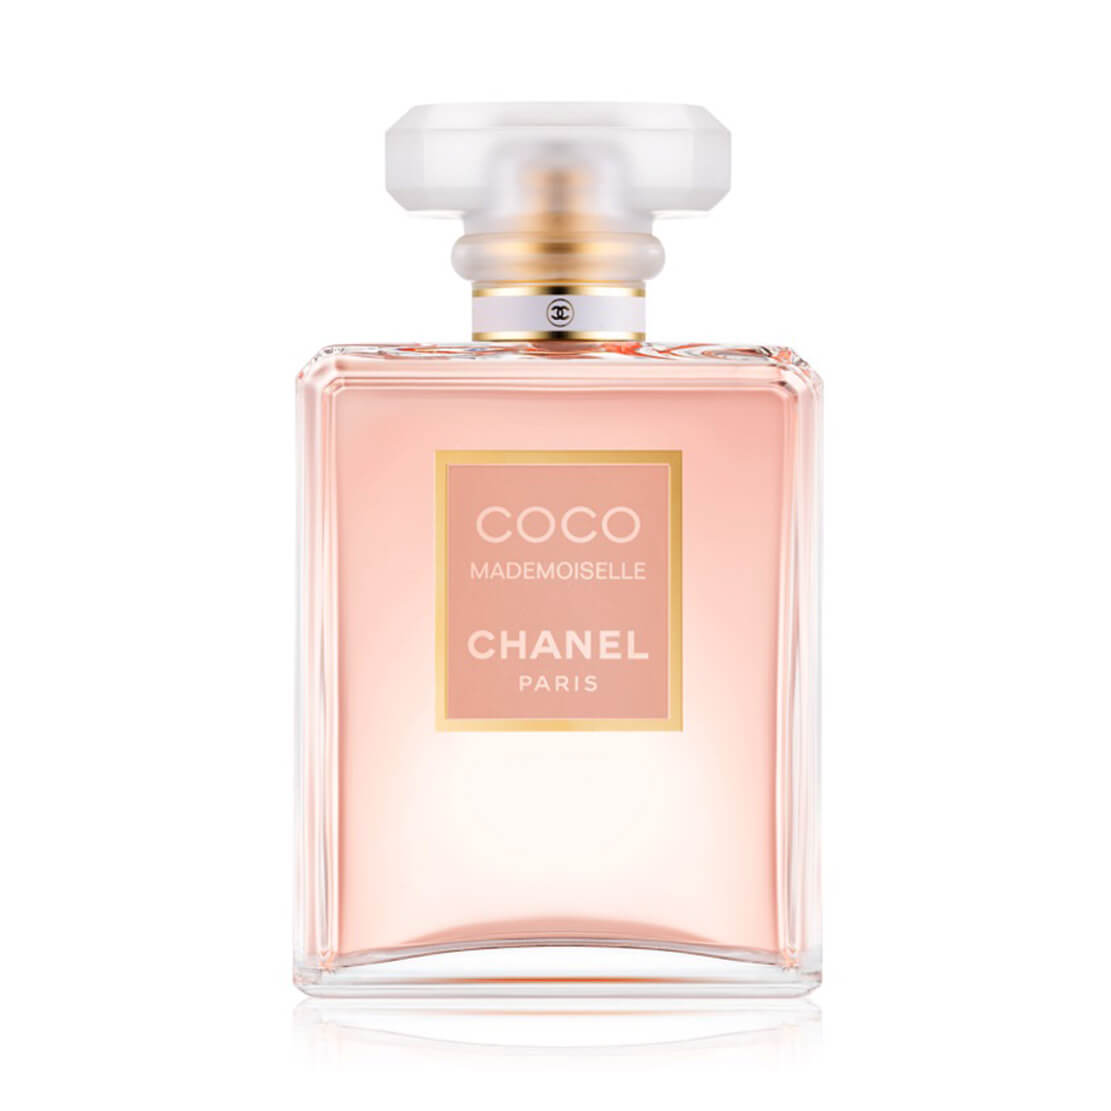 be your own muse with coco chanel's fragrance🔮 @chanel.beauty  #CHANELFragrance #CocoMademoiselle